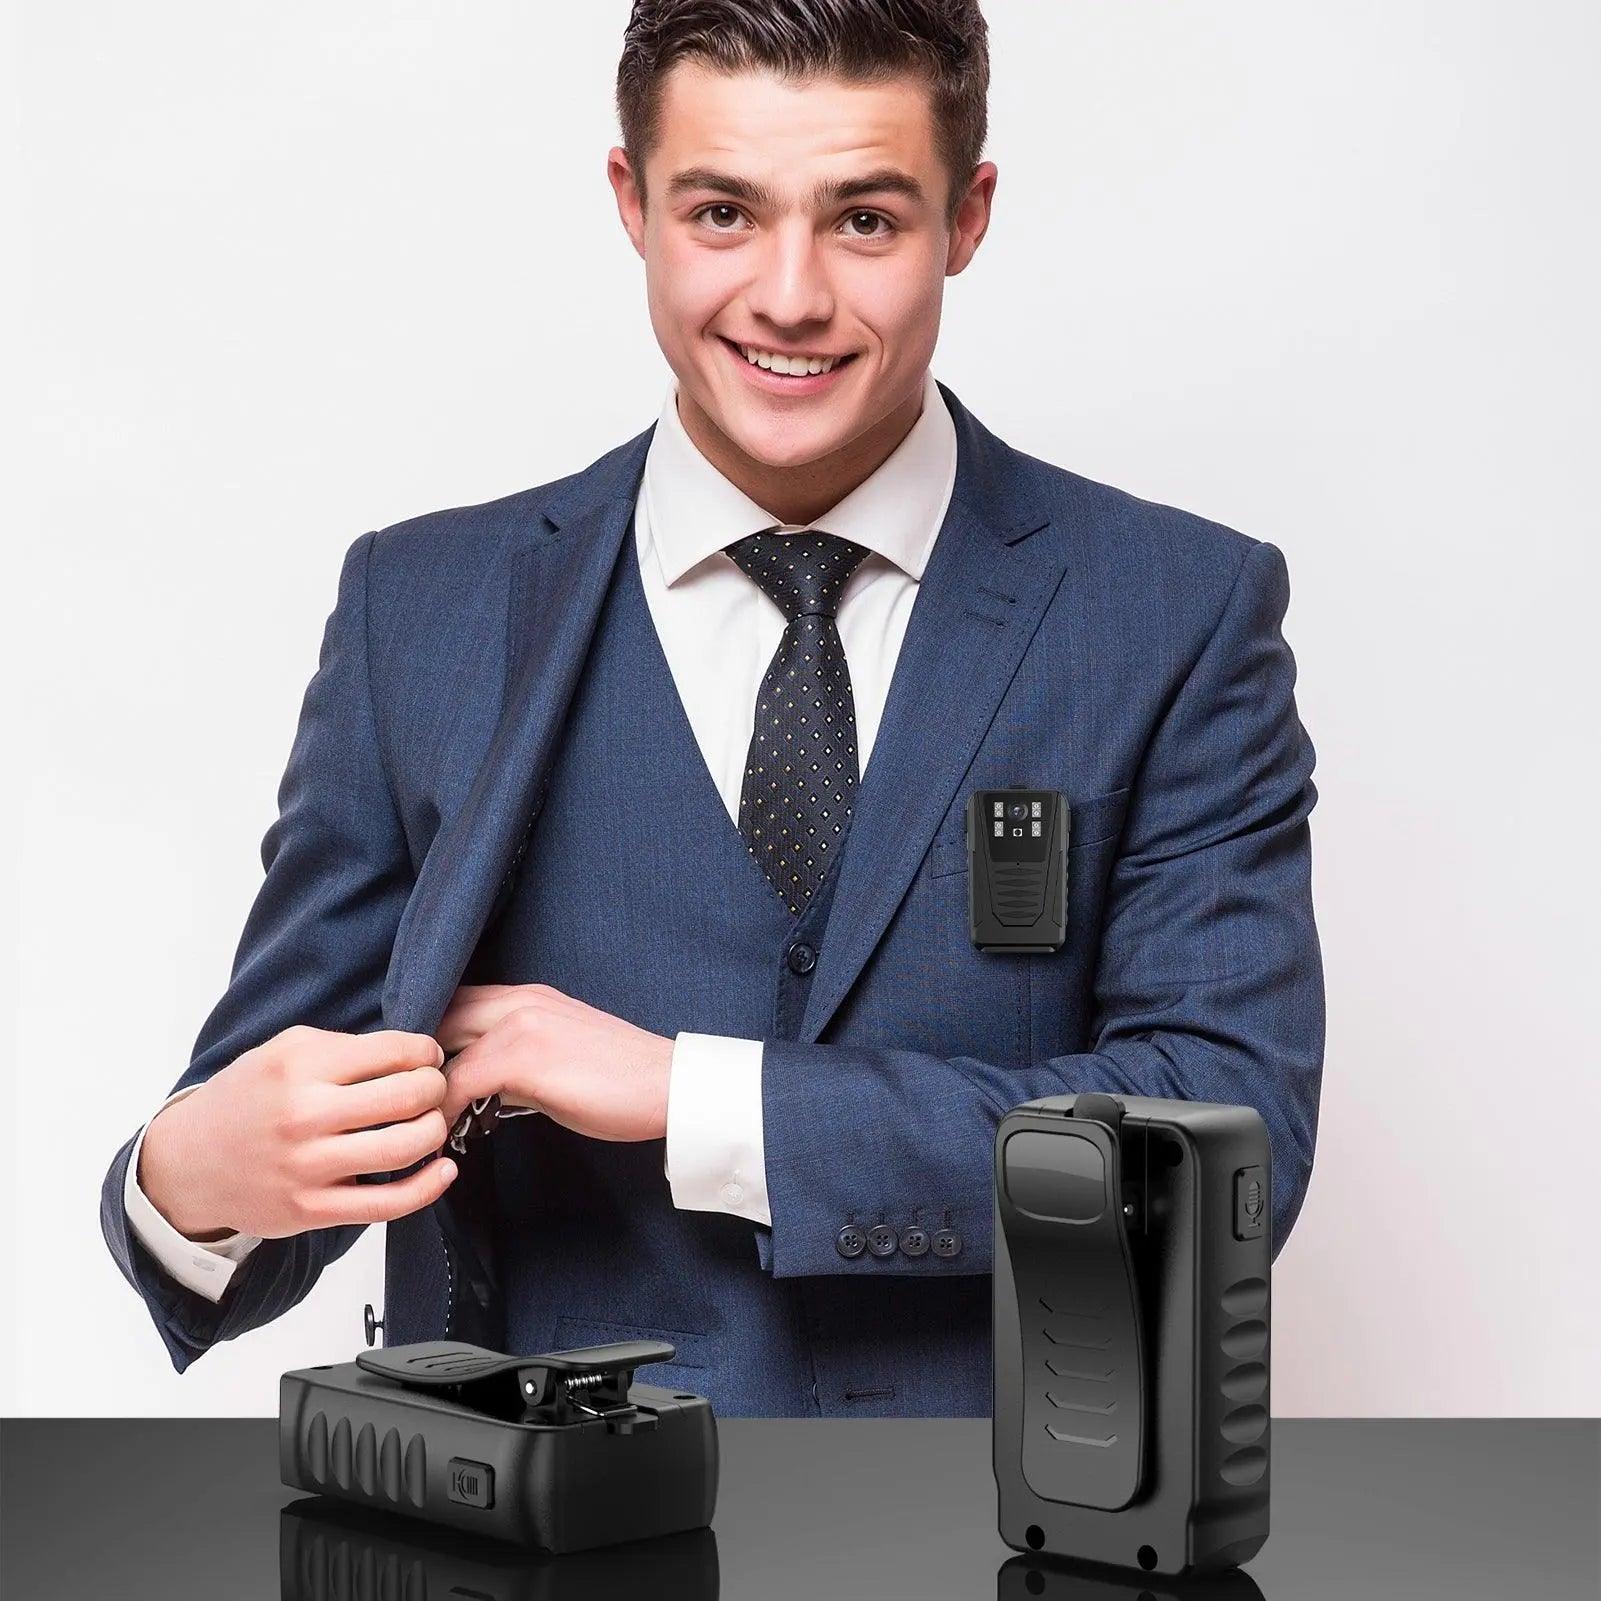 WIFI Mini Body Cameras with Audio and Video Recording with APP Remote Control - Swayfer Tech